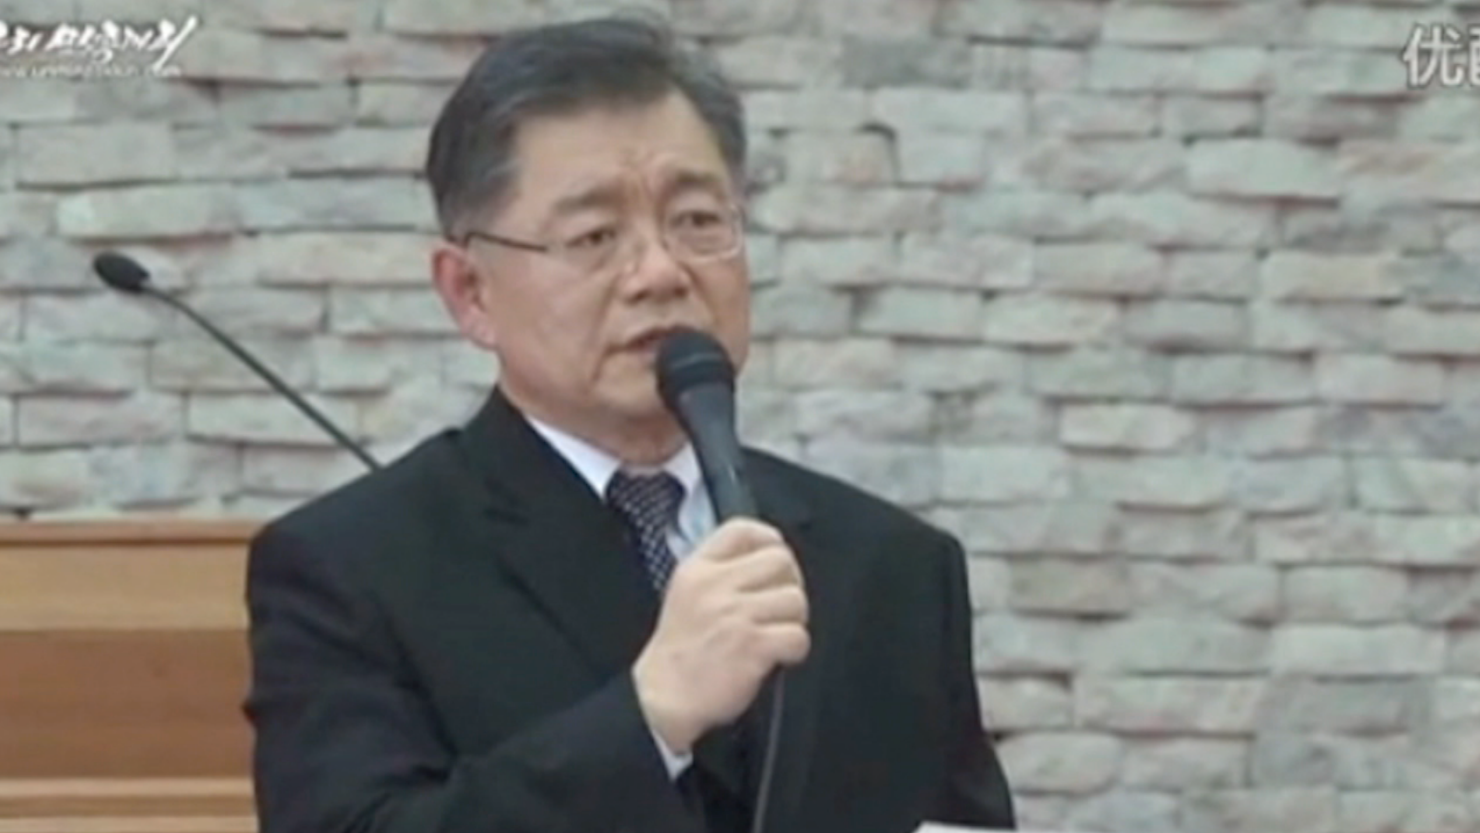 Video grab released by North Korea on August 2 shows Rev. Hyeon Soo Lim "confessing."